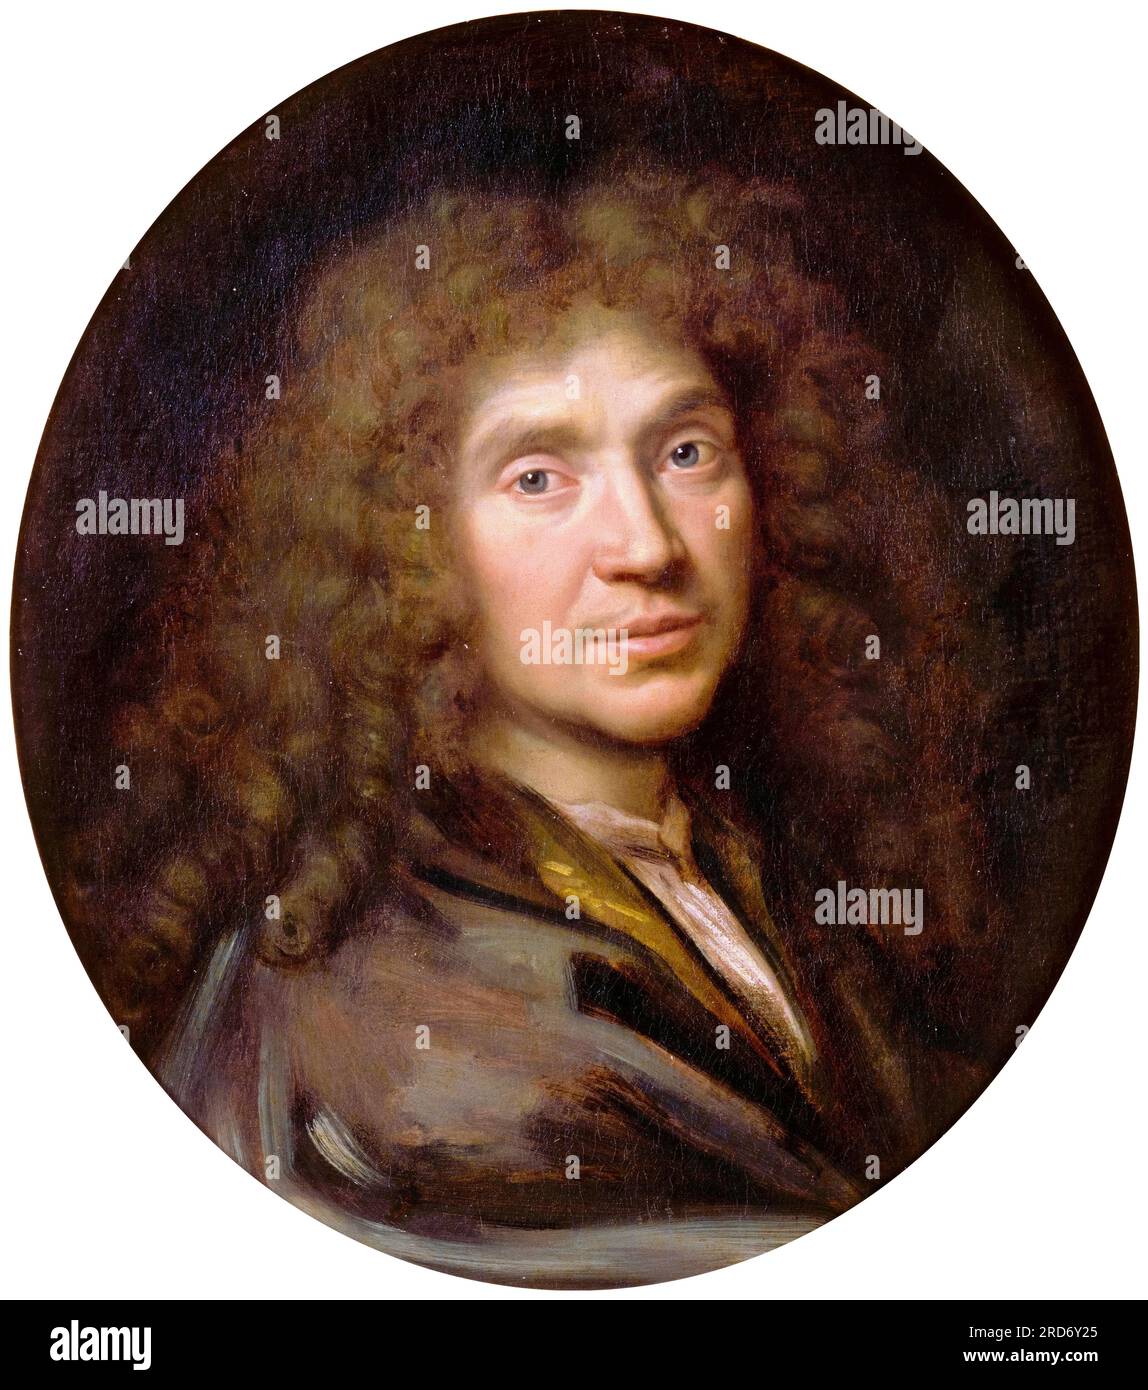 Molière (Jean-Baptiste Poquelin, 1622-1673), portrait painting of the French playwright, actor and poet in oil on canvas by Pierre Mignard, circa 1658 Stock Photo